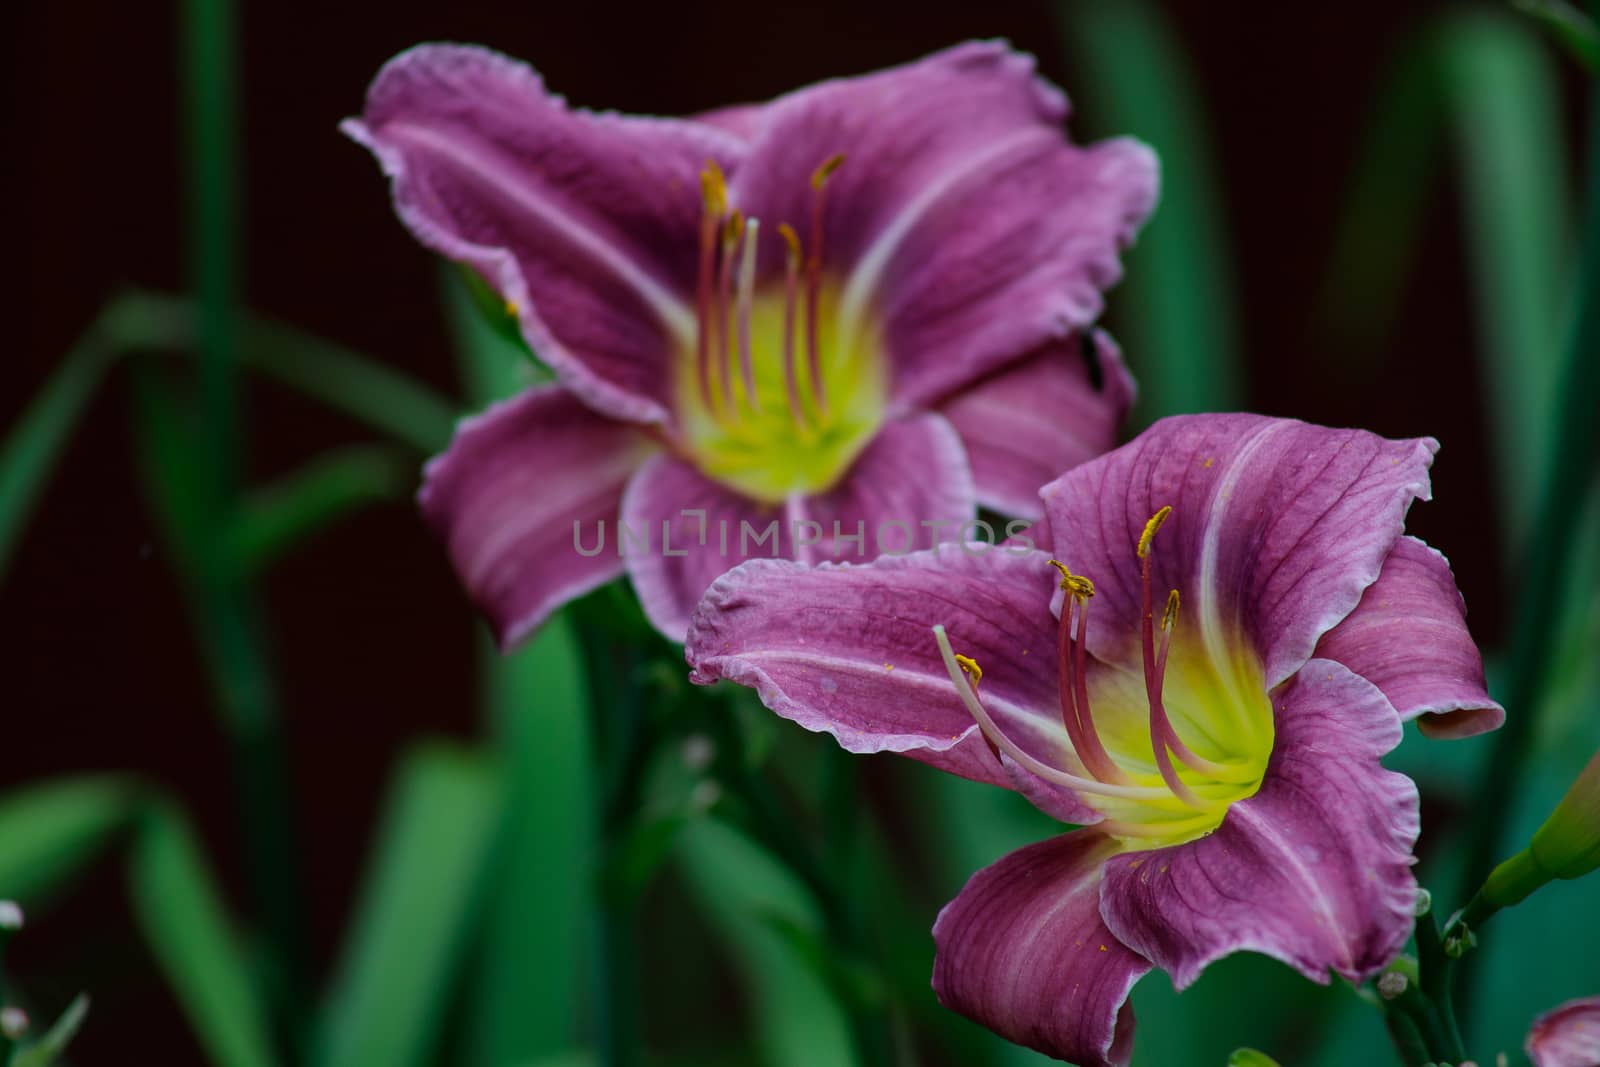 Purple lily or hemerocallis flowers in the garden. Flowers bloom in summer. Tongue flower coquetry.